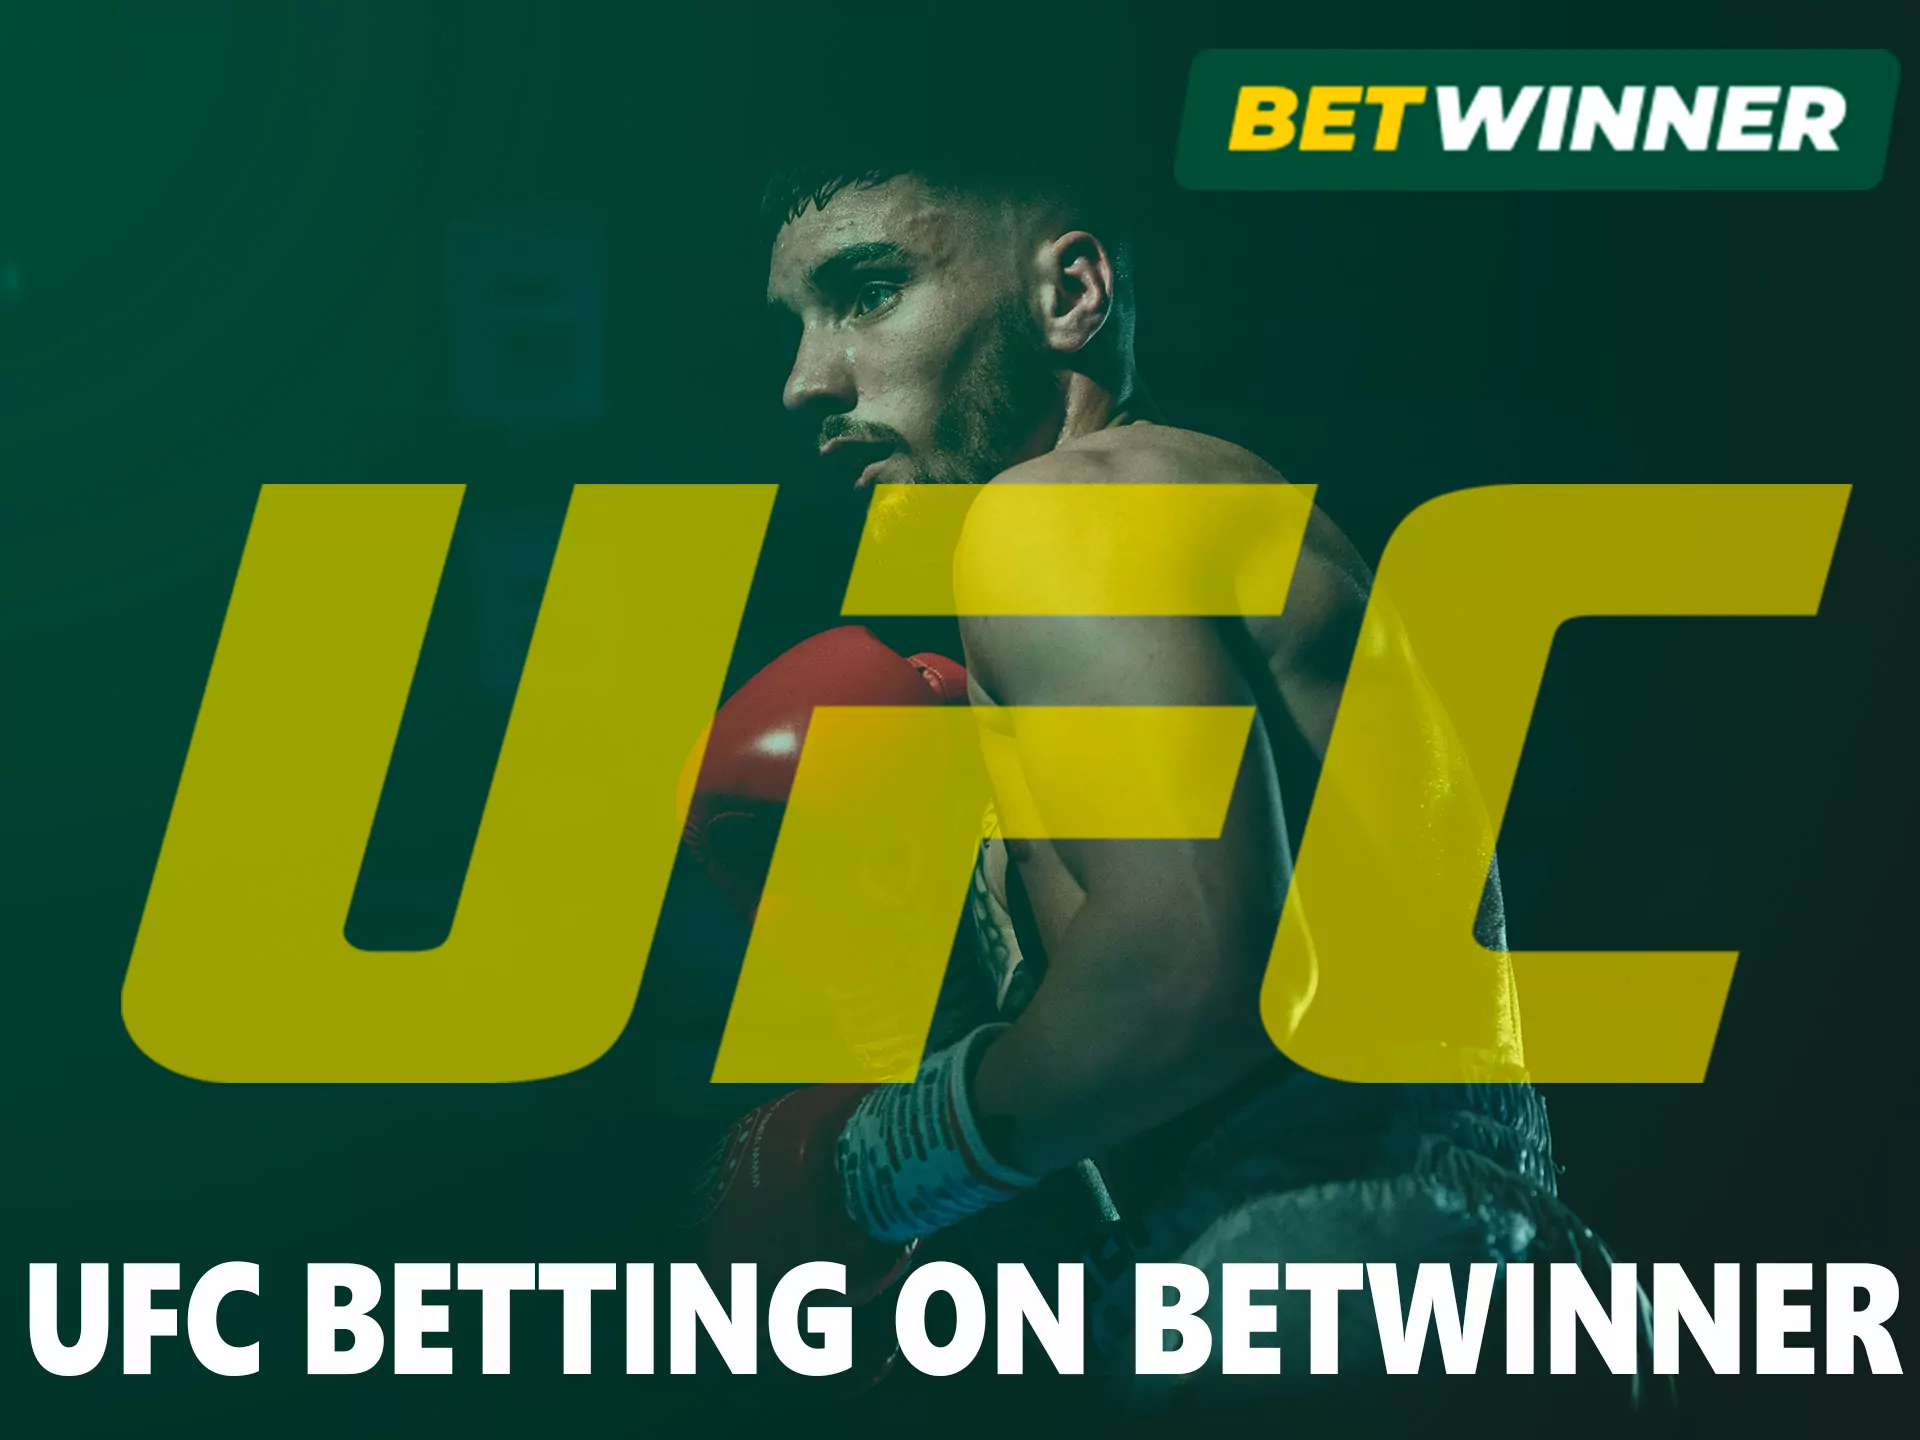 Hot bets on live fights, any hit can lead to the end of the match.